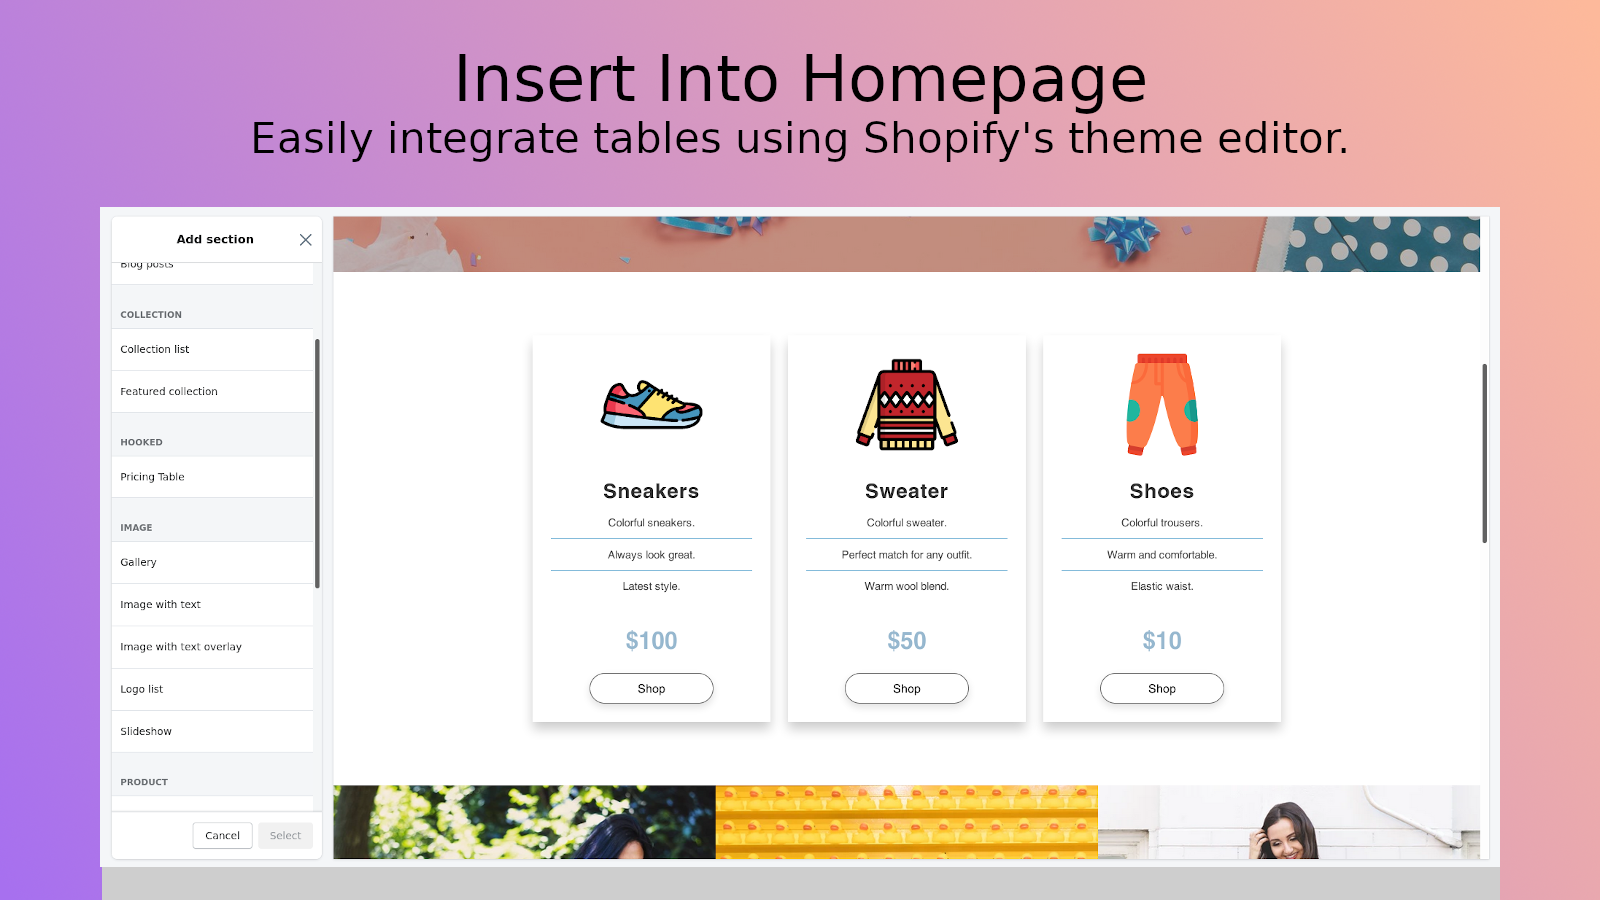 Insert table using Shopify's theme editor.